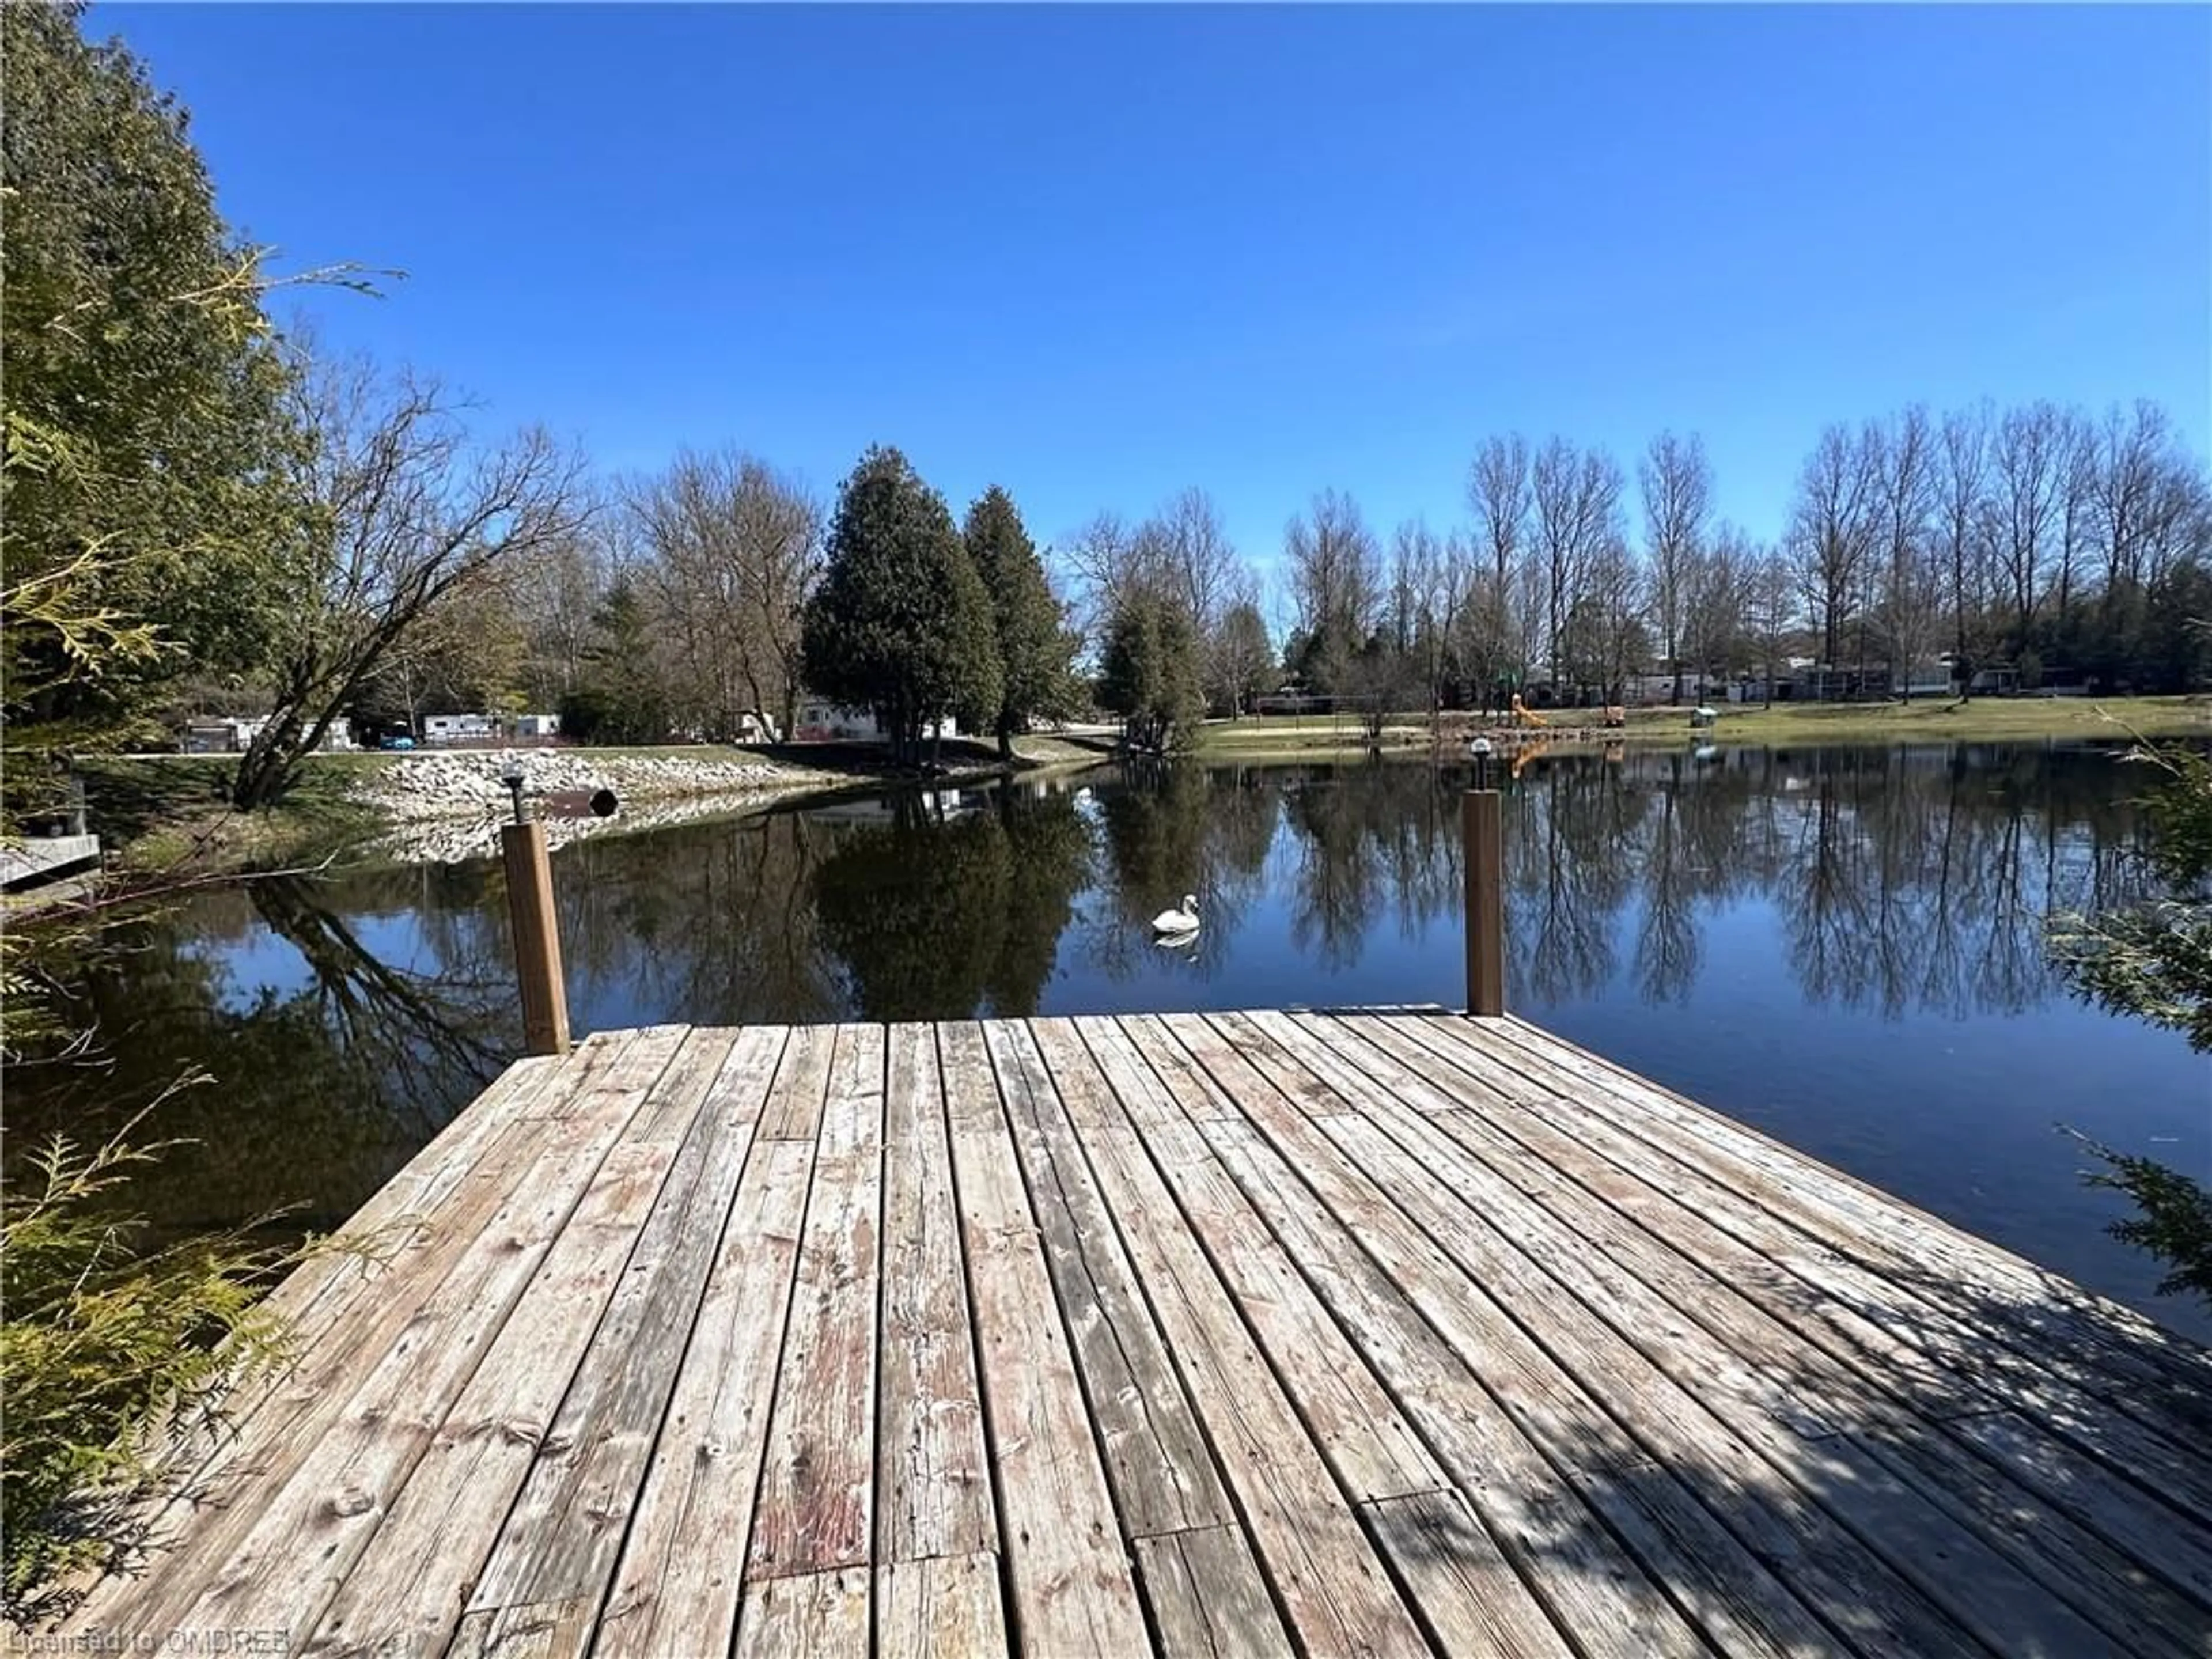 Lakeview for 7489 Sideroad 5 E #Edgewater 5, Mount Forest Ontario N0G 2L0